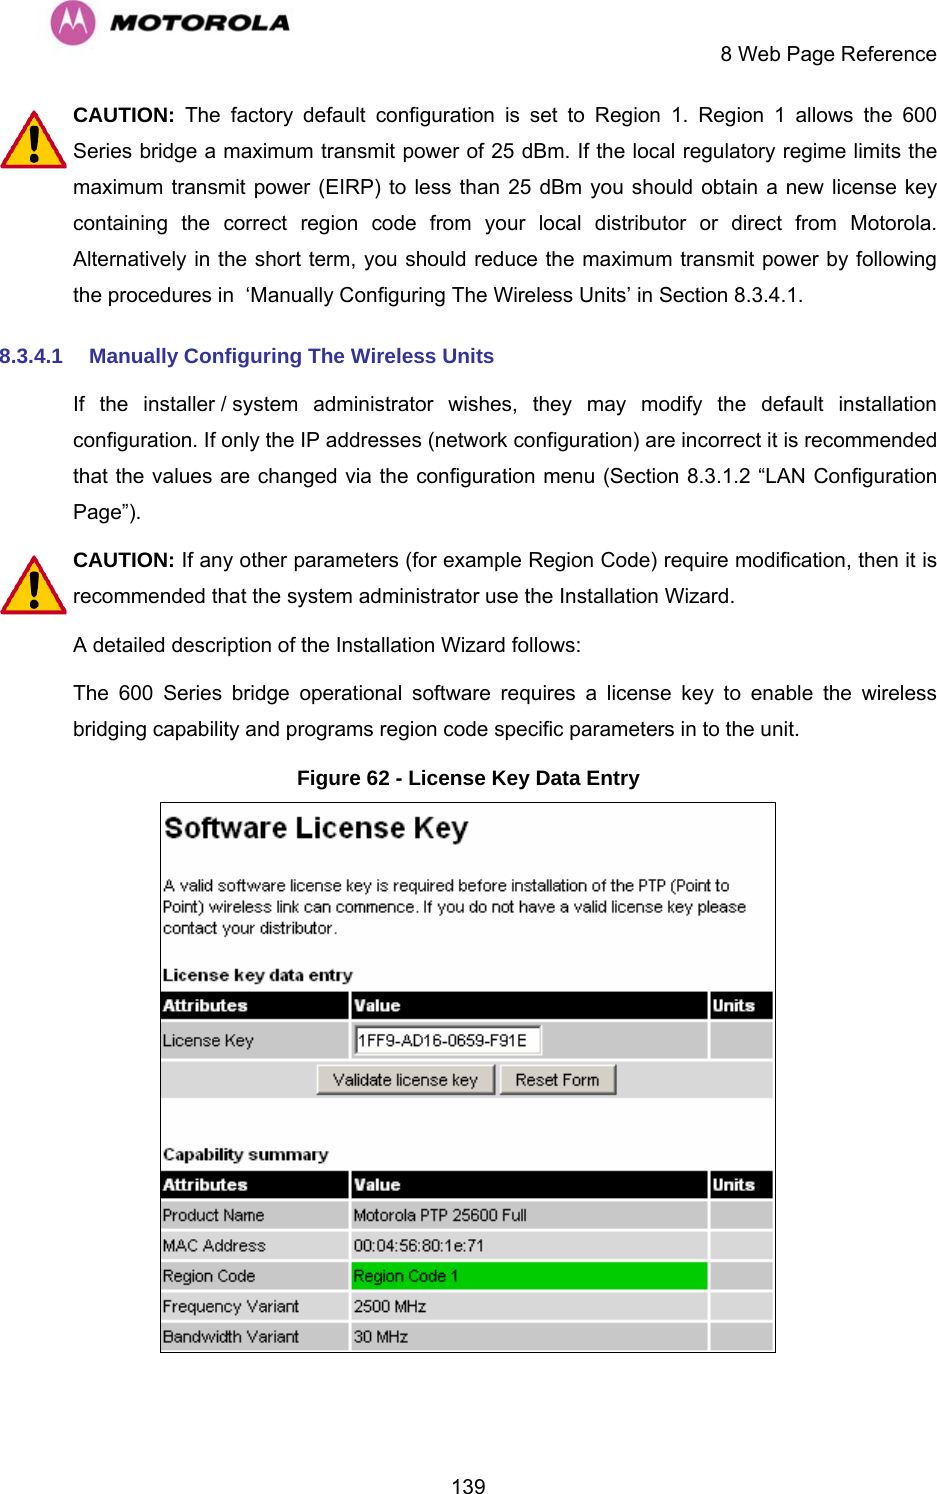     8 Web Page Reference  139CAUTION:  The factory default configuration is set to Region 1. Region 1 allows the 600 Series bridge a maximum transmit power of 25 dBm. If the local regulatory regime limits the maximum transmit power (EIRP) to less than 25 dBm you should obtain a new license key containing the correct region code from your local distributor or direct from Motorola.  Alternatively in the short term, you should reduce the maximum transmit power by following the procedures in  ‘Manually Configuring The Wireless Units’ in Section 8.3.4.1.  8.3.4.1  Manually Configuring The Wireless Units If the installer / system administrator wishes, they may modify the default installation configuration. If only the IP addresses (network configuration) are incorrect it is recommended that the values are changed via the configuration menu (Section 8.3.1.2 “LAN Configuration Page”). CAUTION: If any other parameters (for example Region Code) require modification, then it is recommended that the system administrator use the Installation Wizard. A detailed description of the Installation Wizard follows: The 600 Series bridge operational software requires a license key to enable the wireless bridging capability and programs region code specific parameters in to the unit.  Figure 62 - License Key Data Entry   